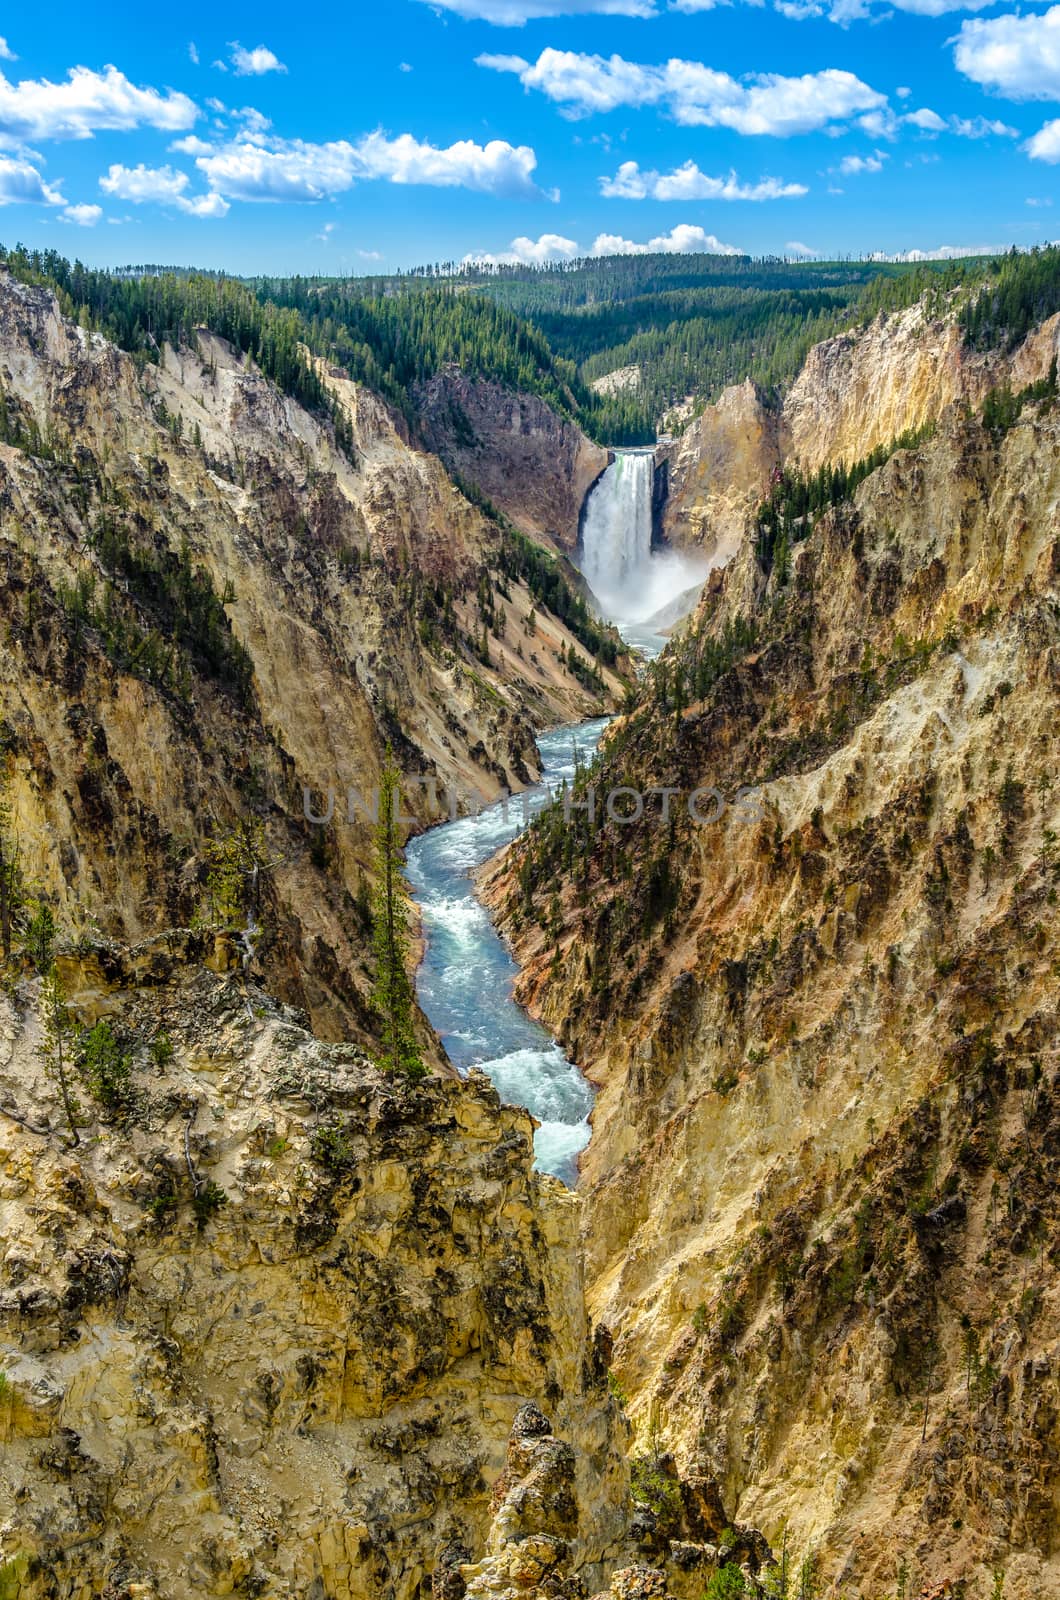 Landscape view at Grand canyon of Yellowstone, Wyoming, USA